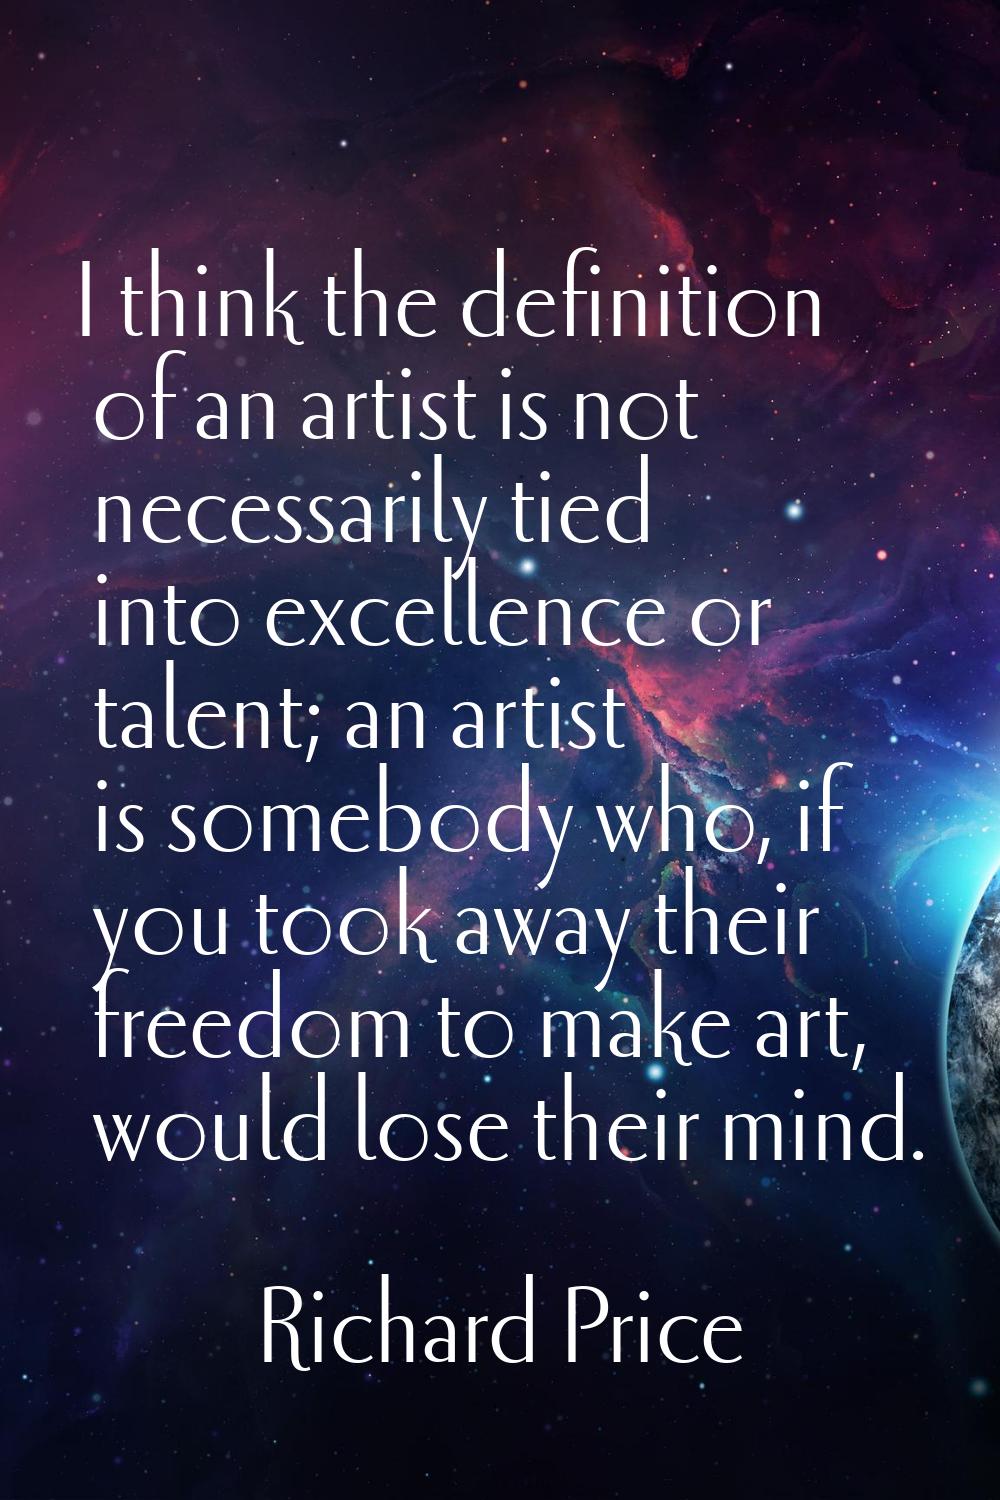 I think the definition of an artist is not necessarily tied into excellence or talent; an artist is